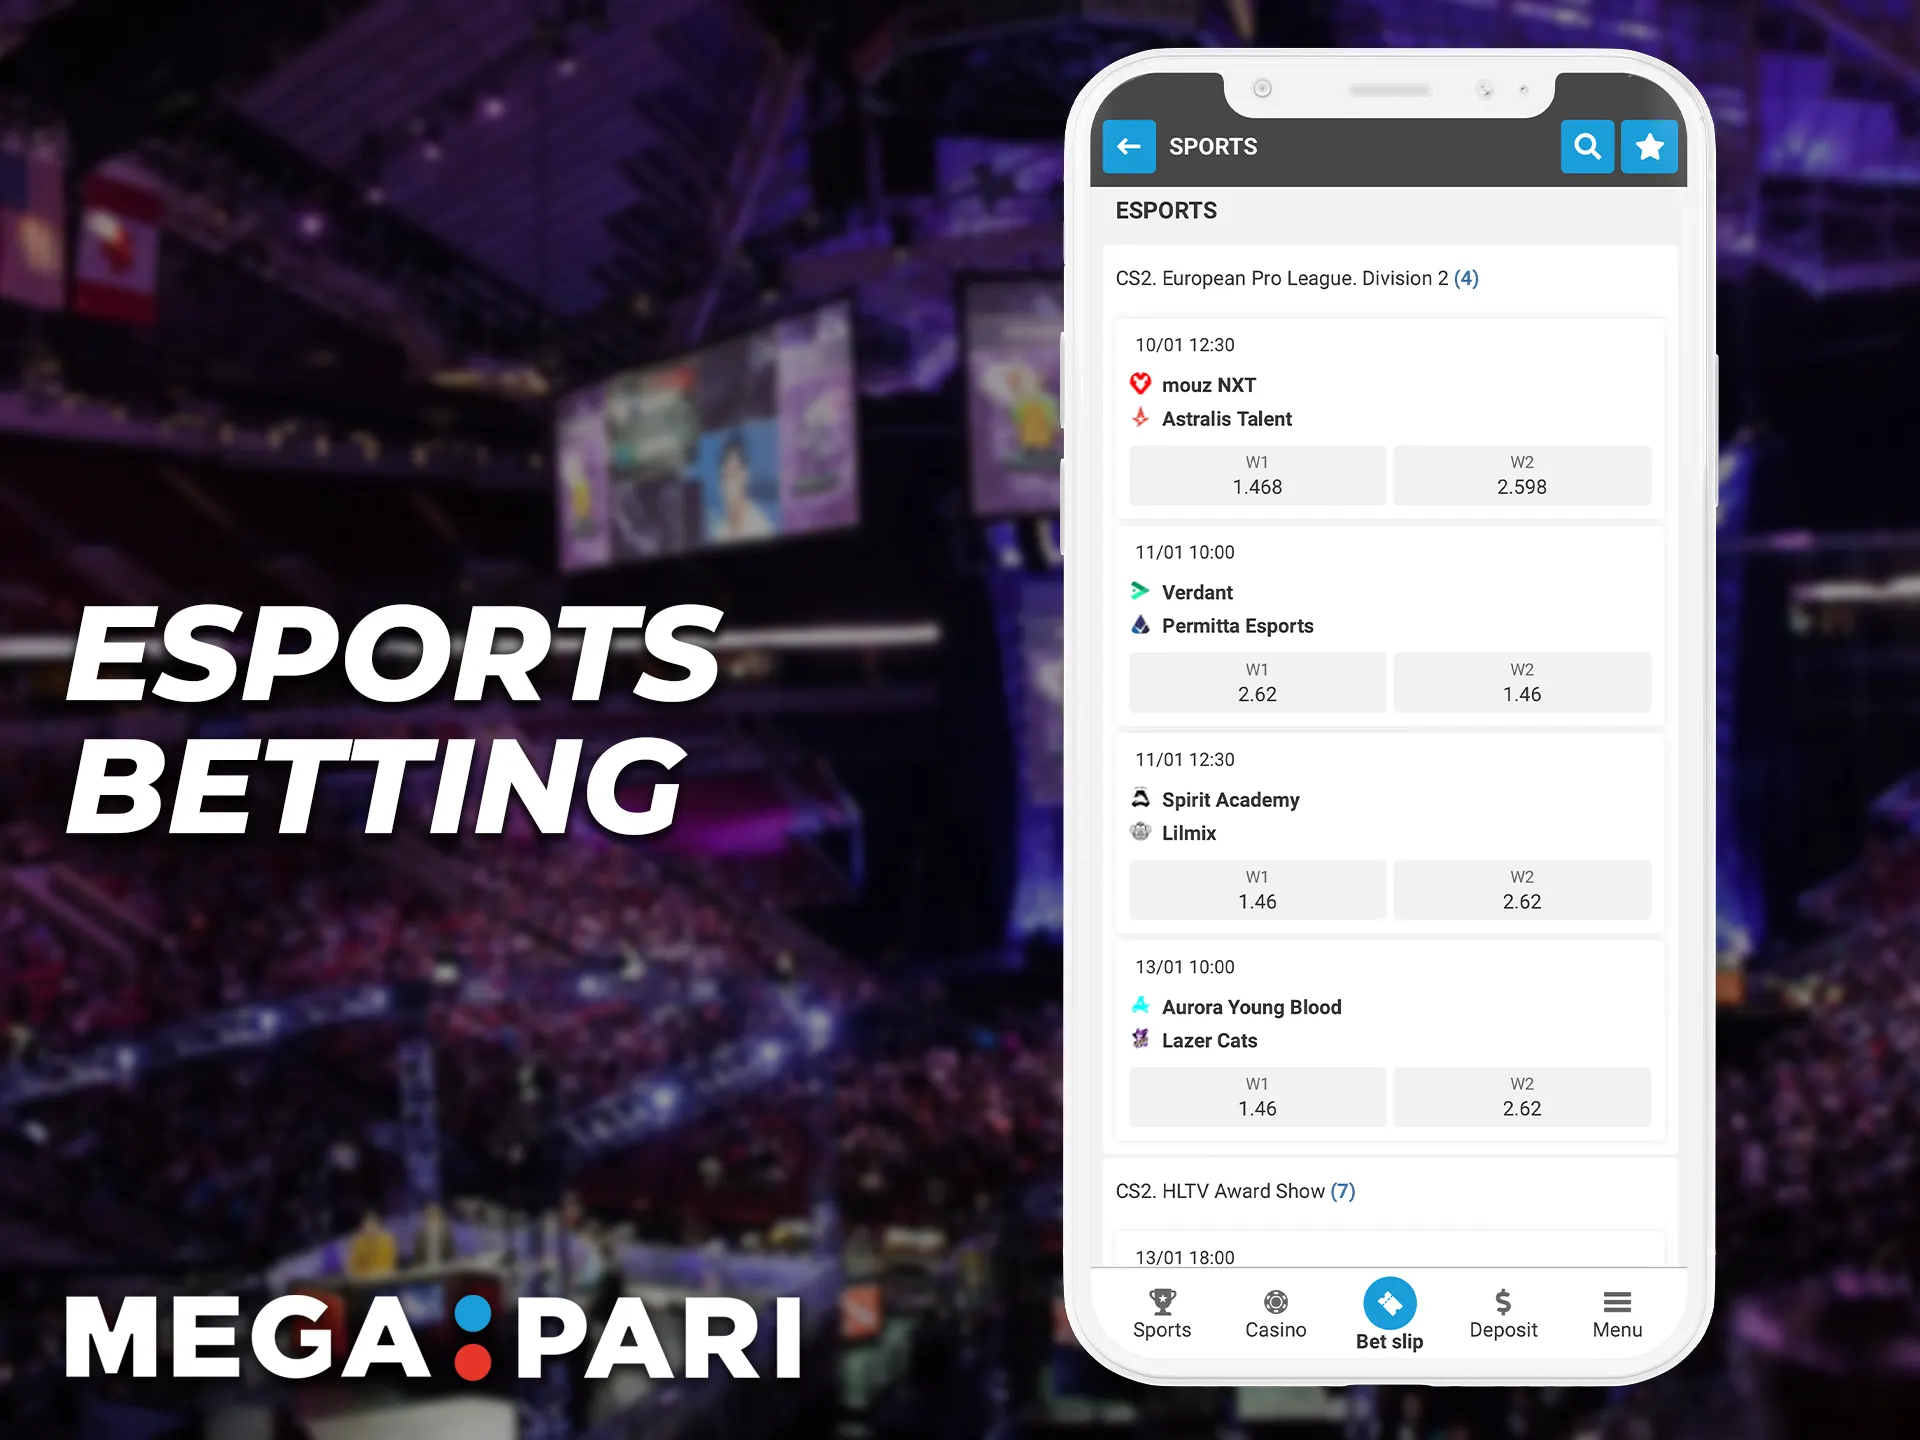 For fans of Dota 2, Counter-Strike and CS:GO games, Megapari offers cyber sports betting.